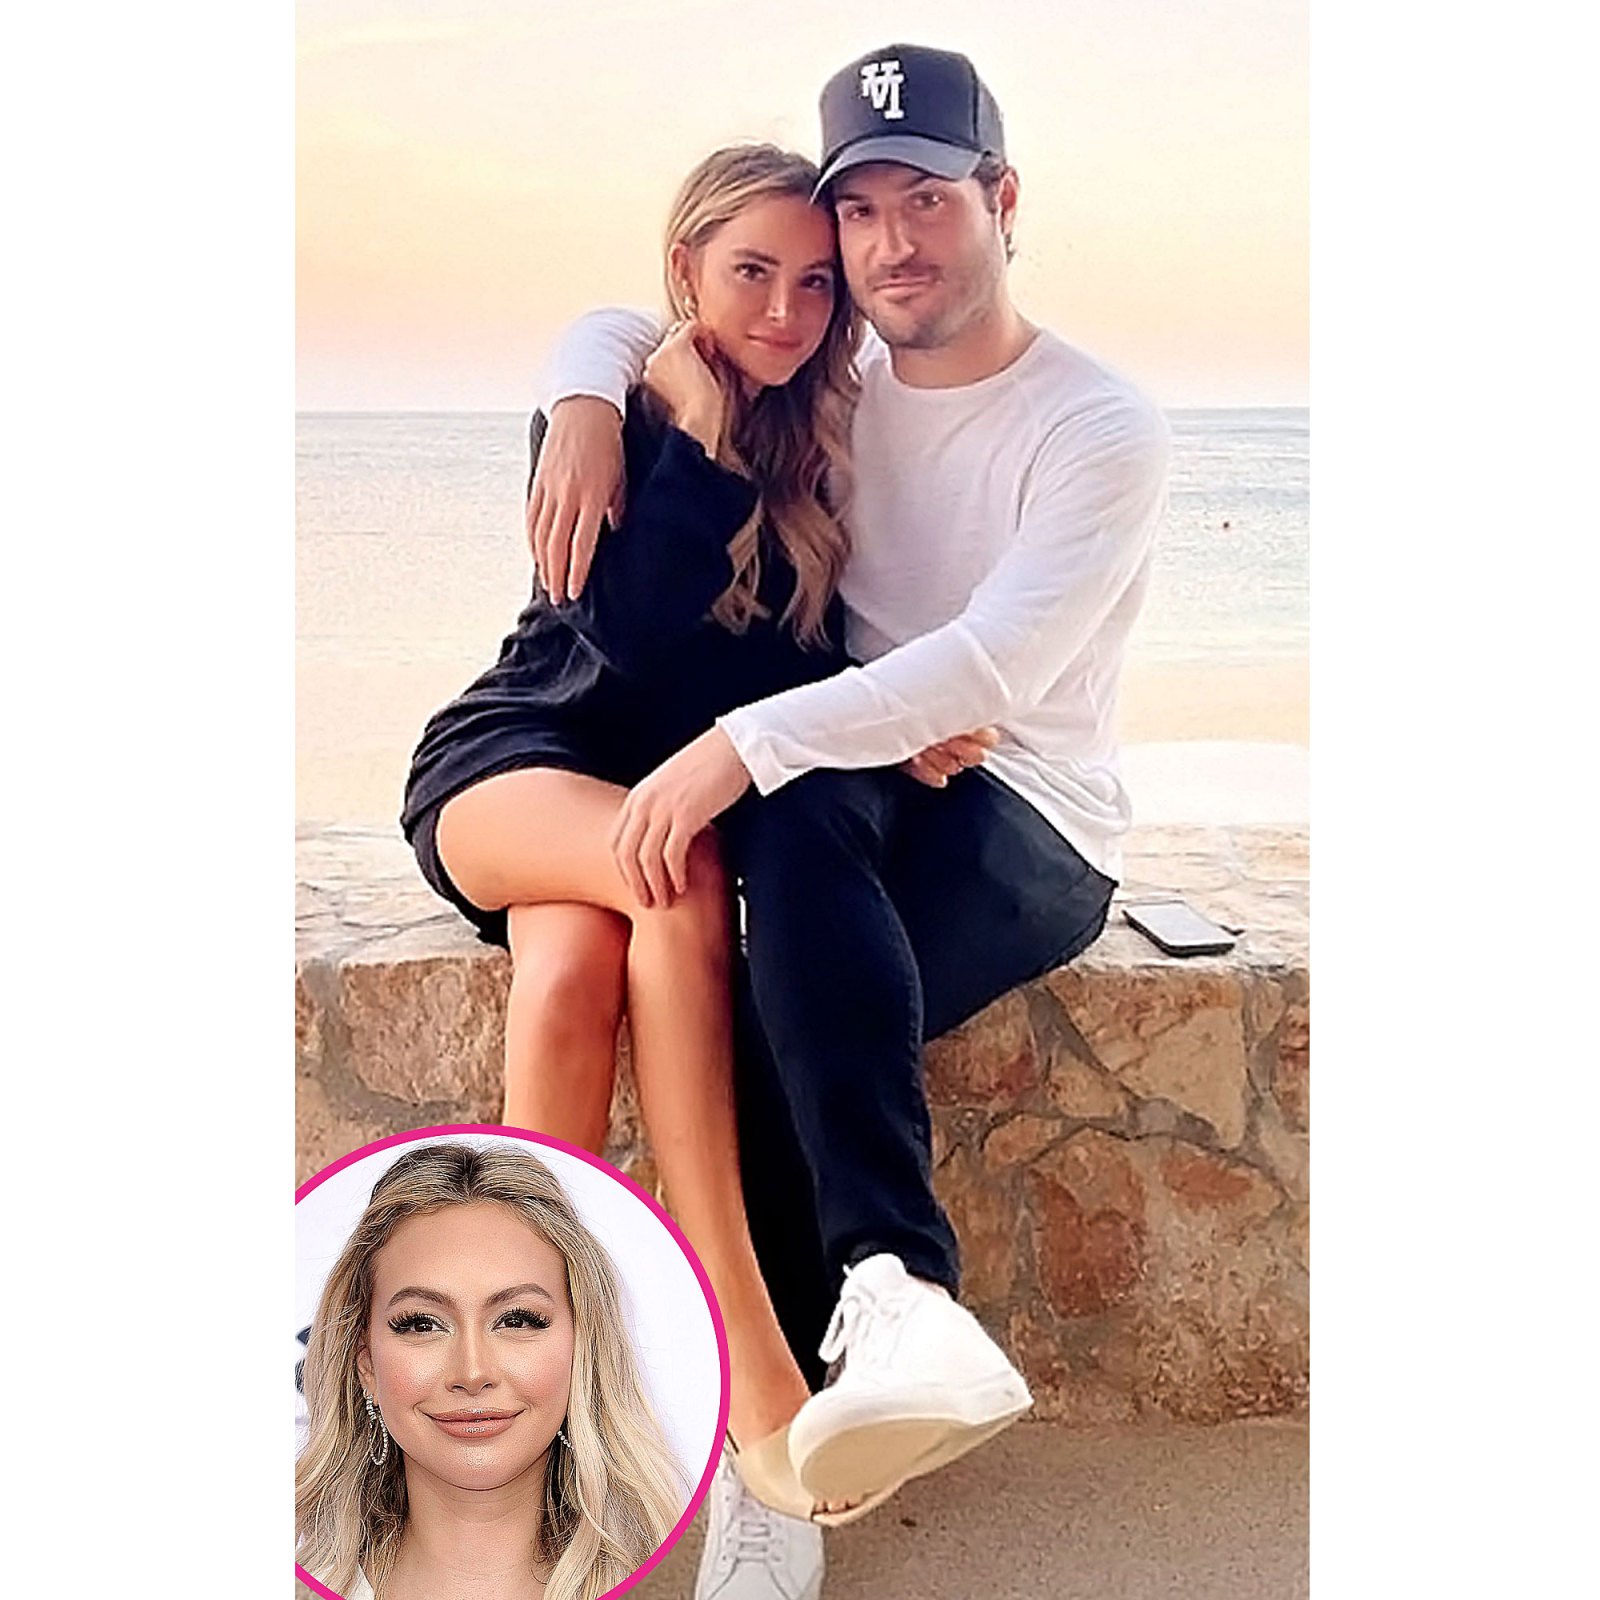 Amanda Stanton New Man Was Previously Linked Another Bachelor Star Corinne Olympios